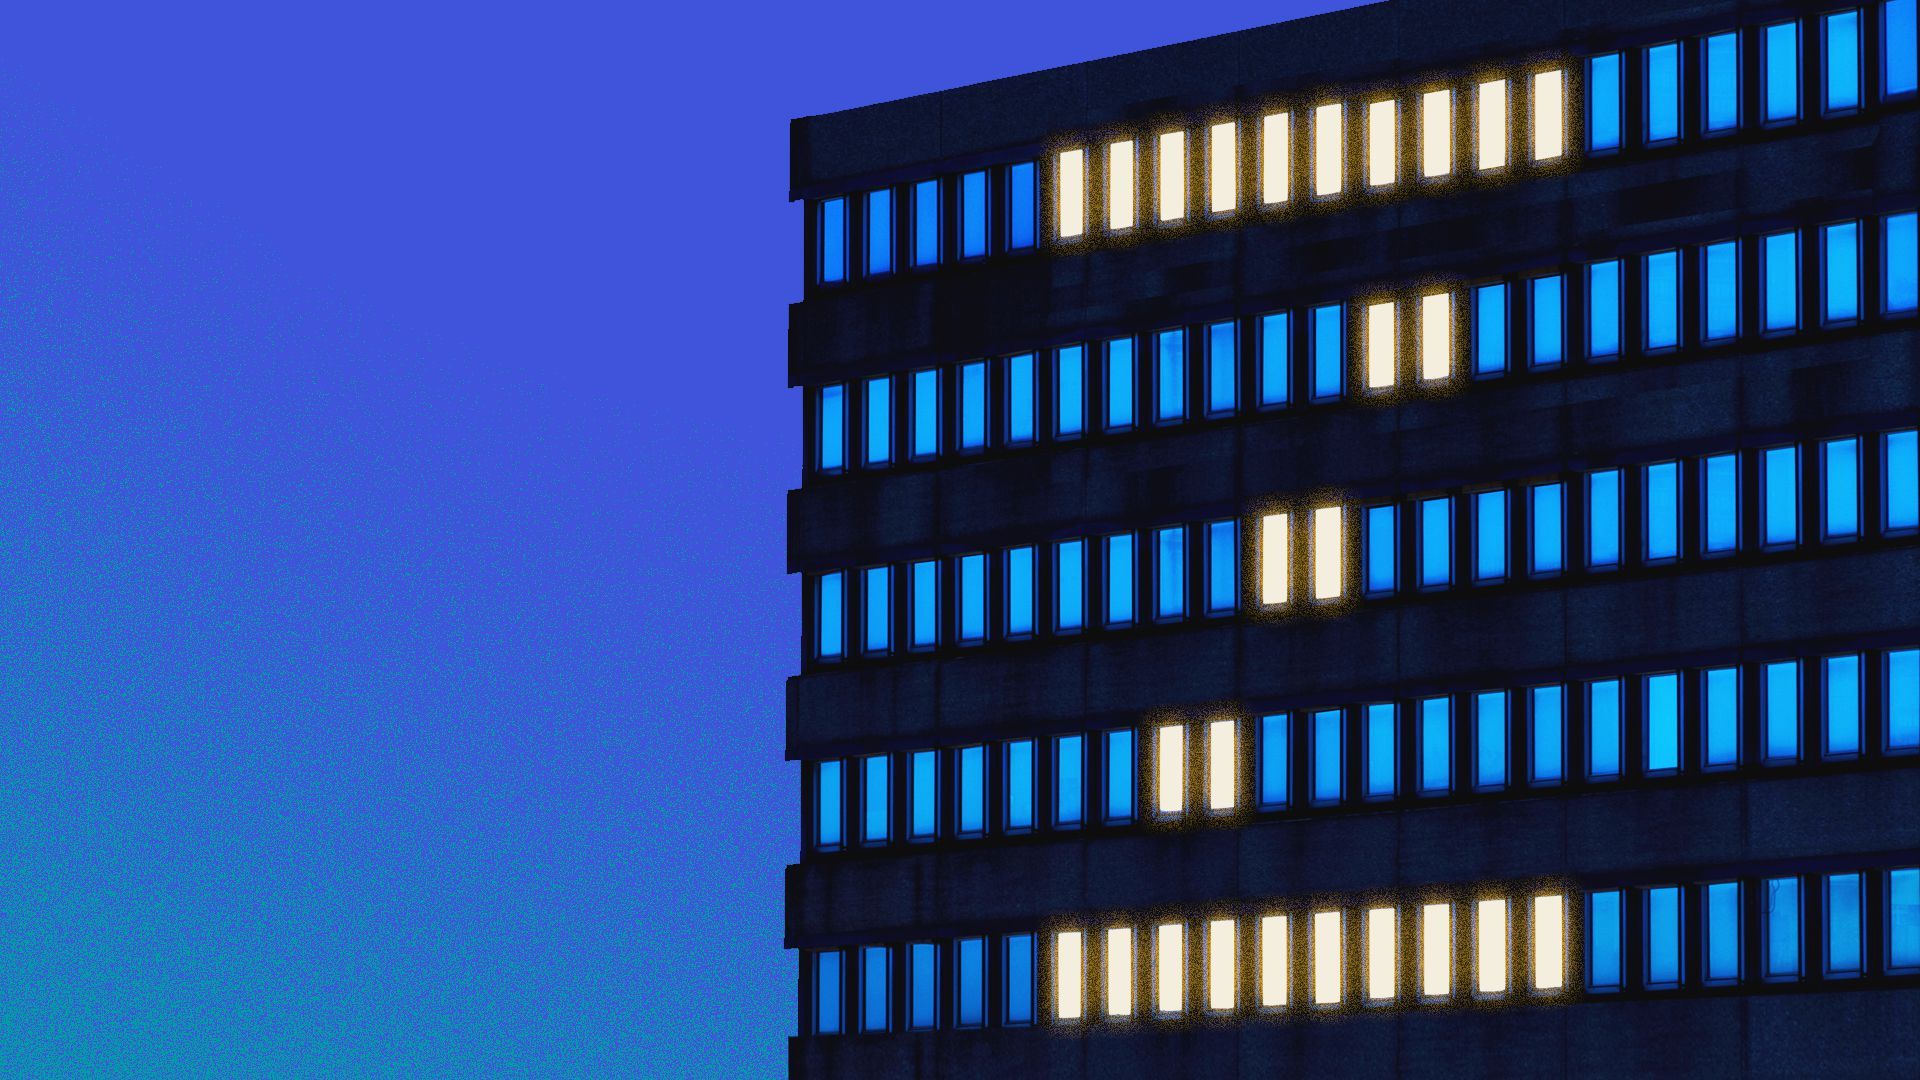 Illustration of illuminated windows on the side of a building in the shape of a "Z."